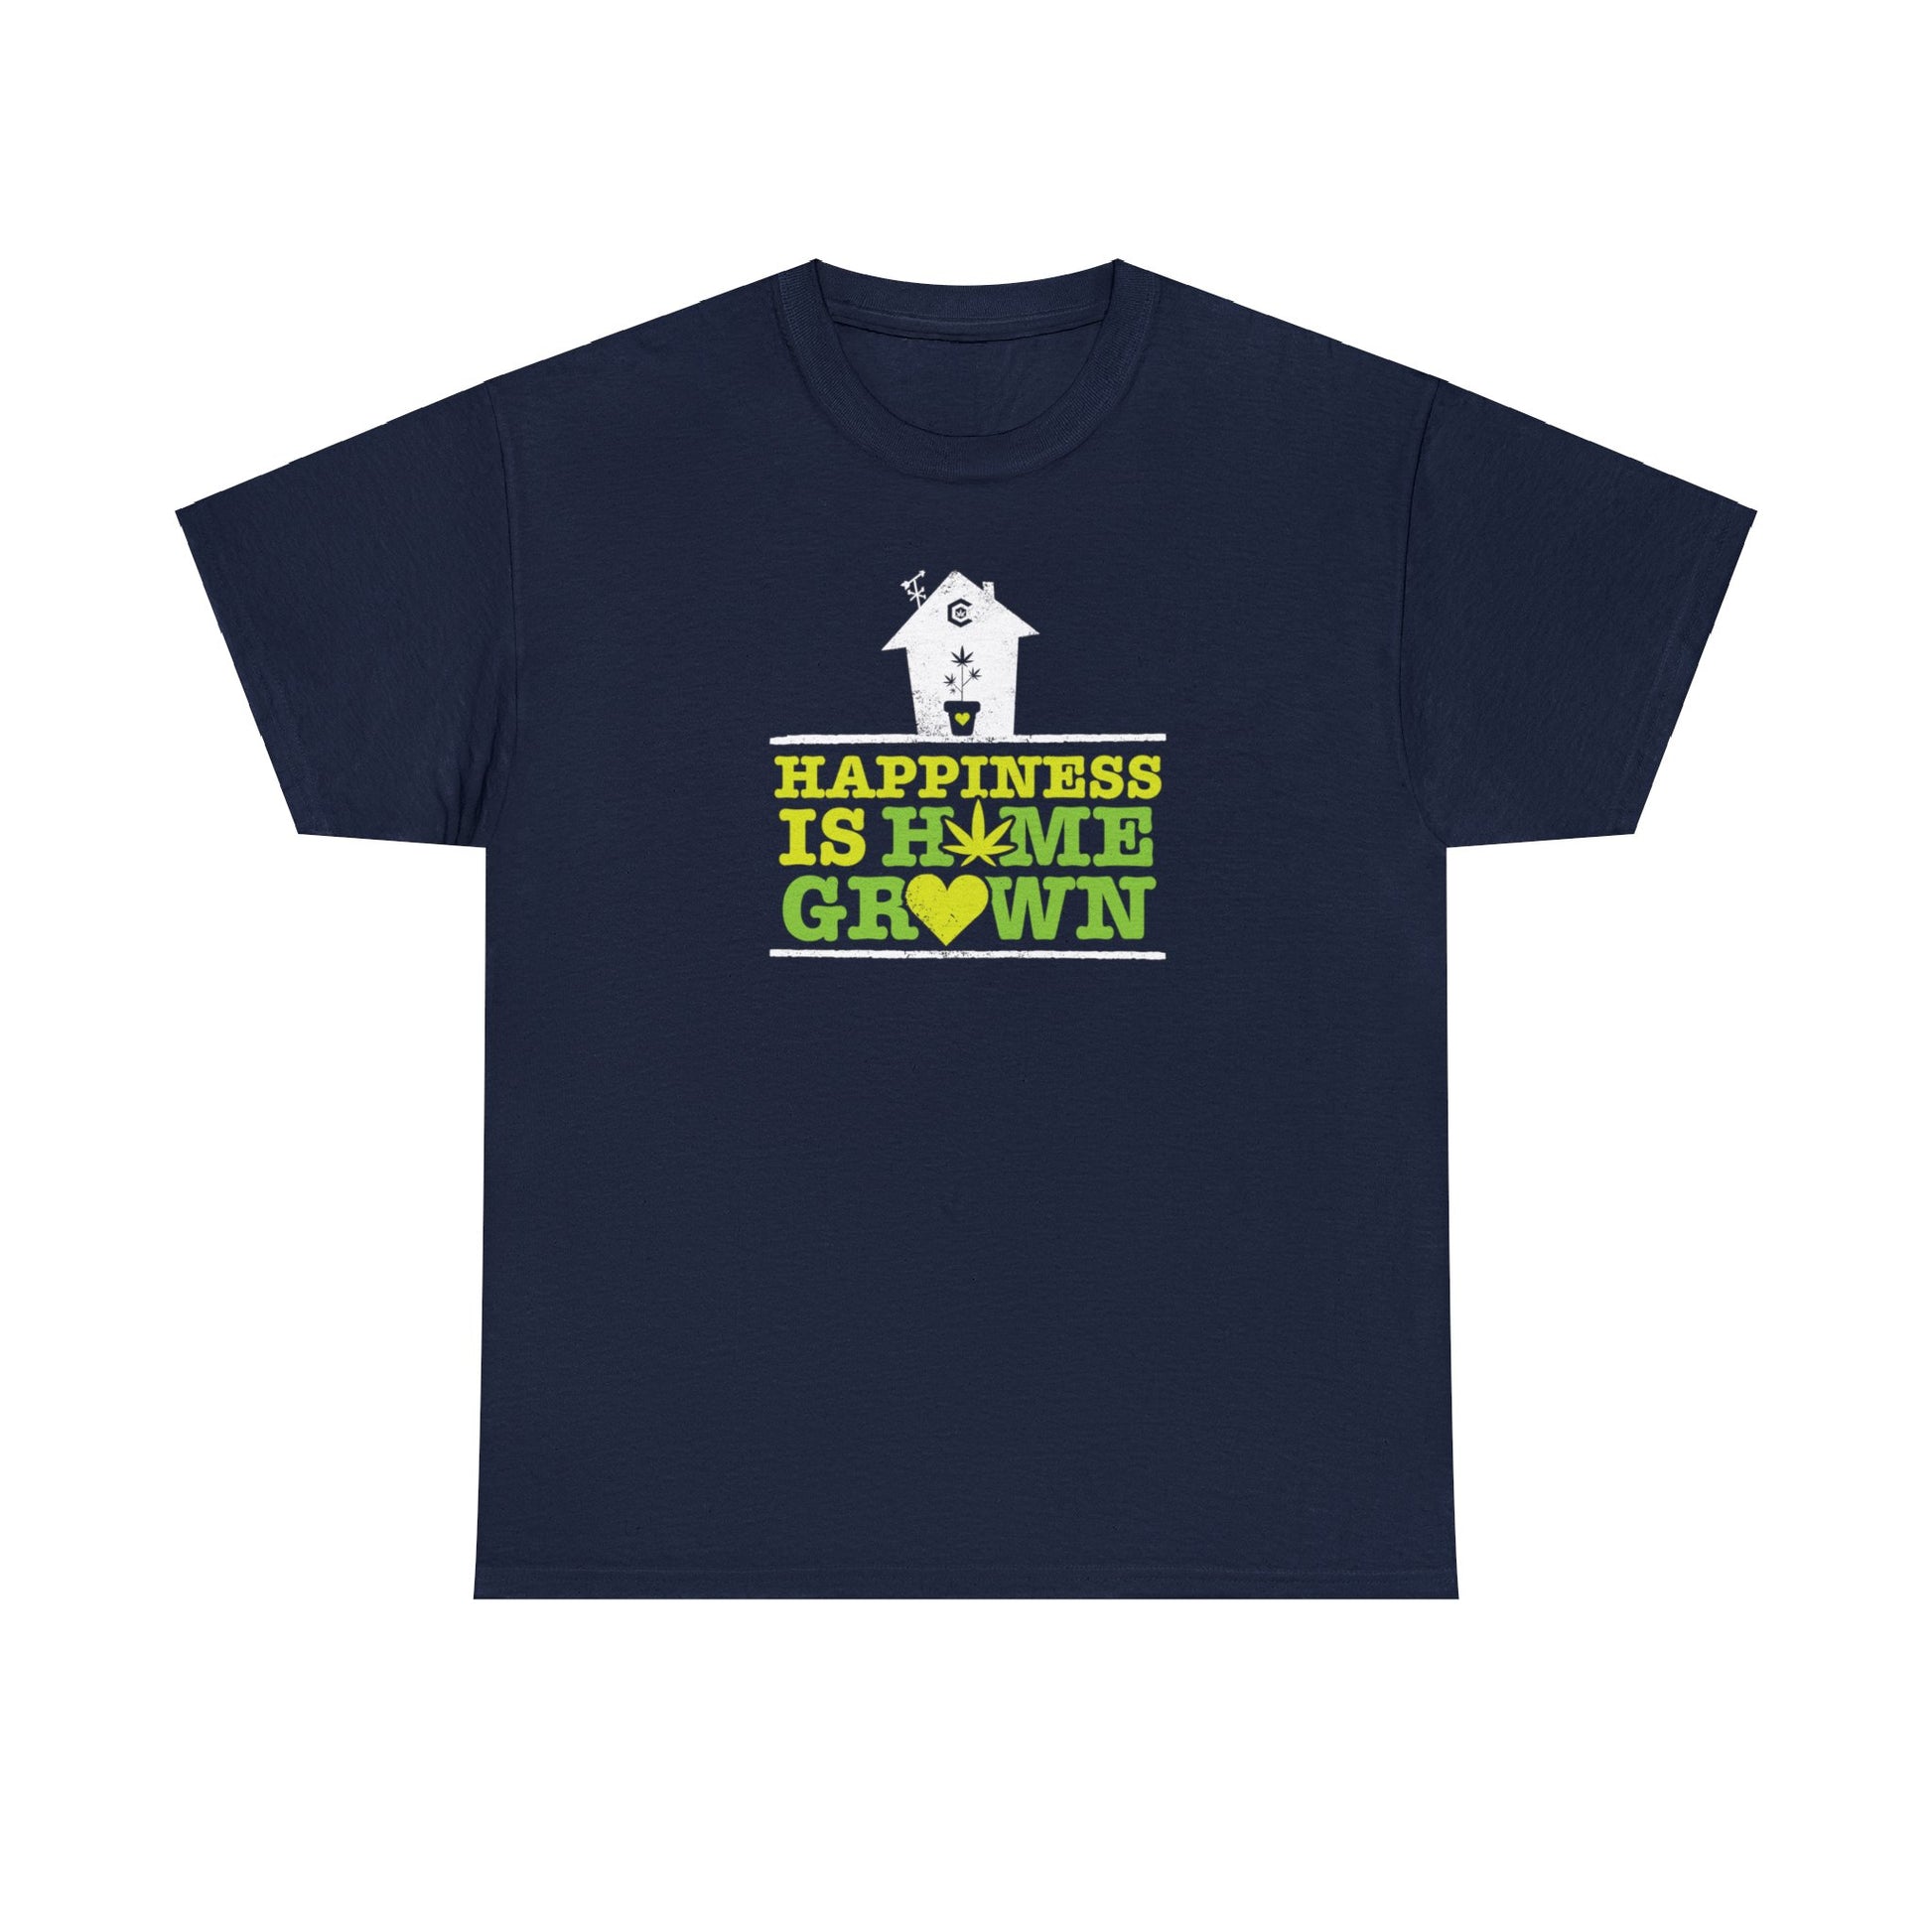 A Happiness Is Homegrown Pot shirt that reads "I'm a farmer's wife" is perfect for showing off your homegrown spirit.